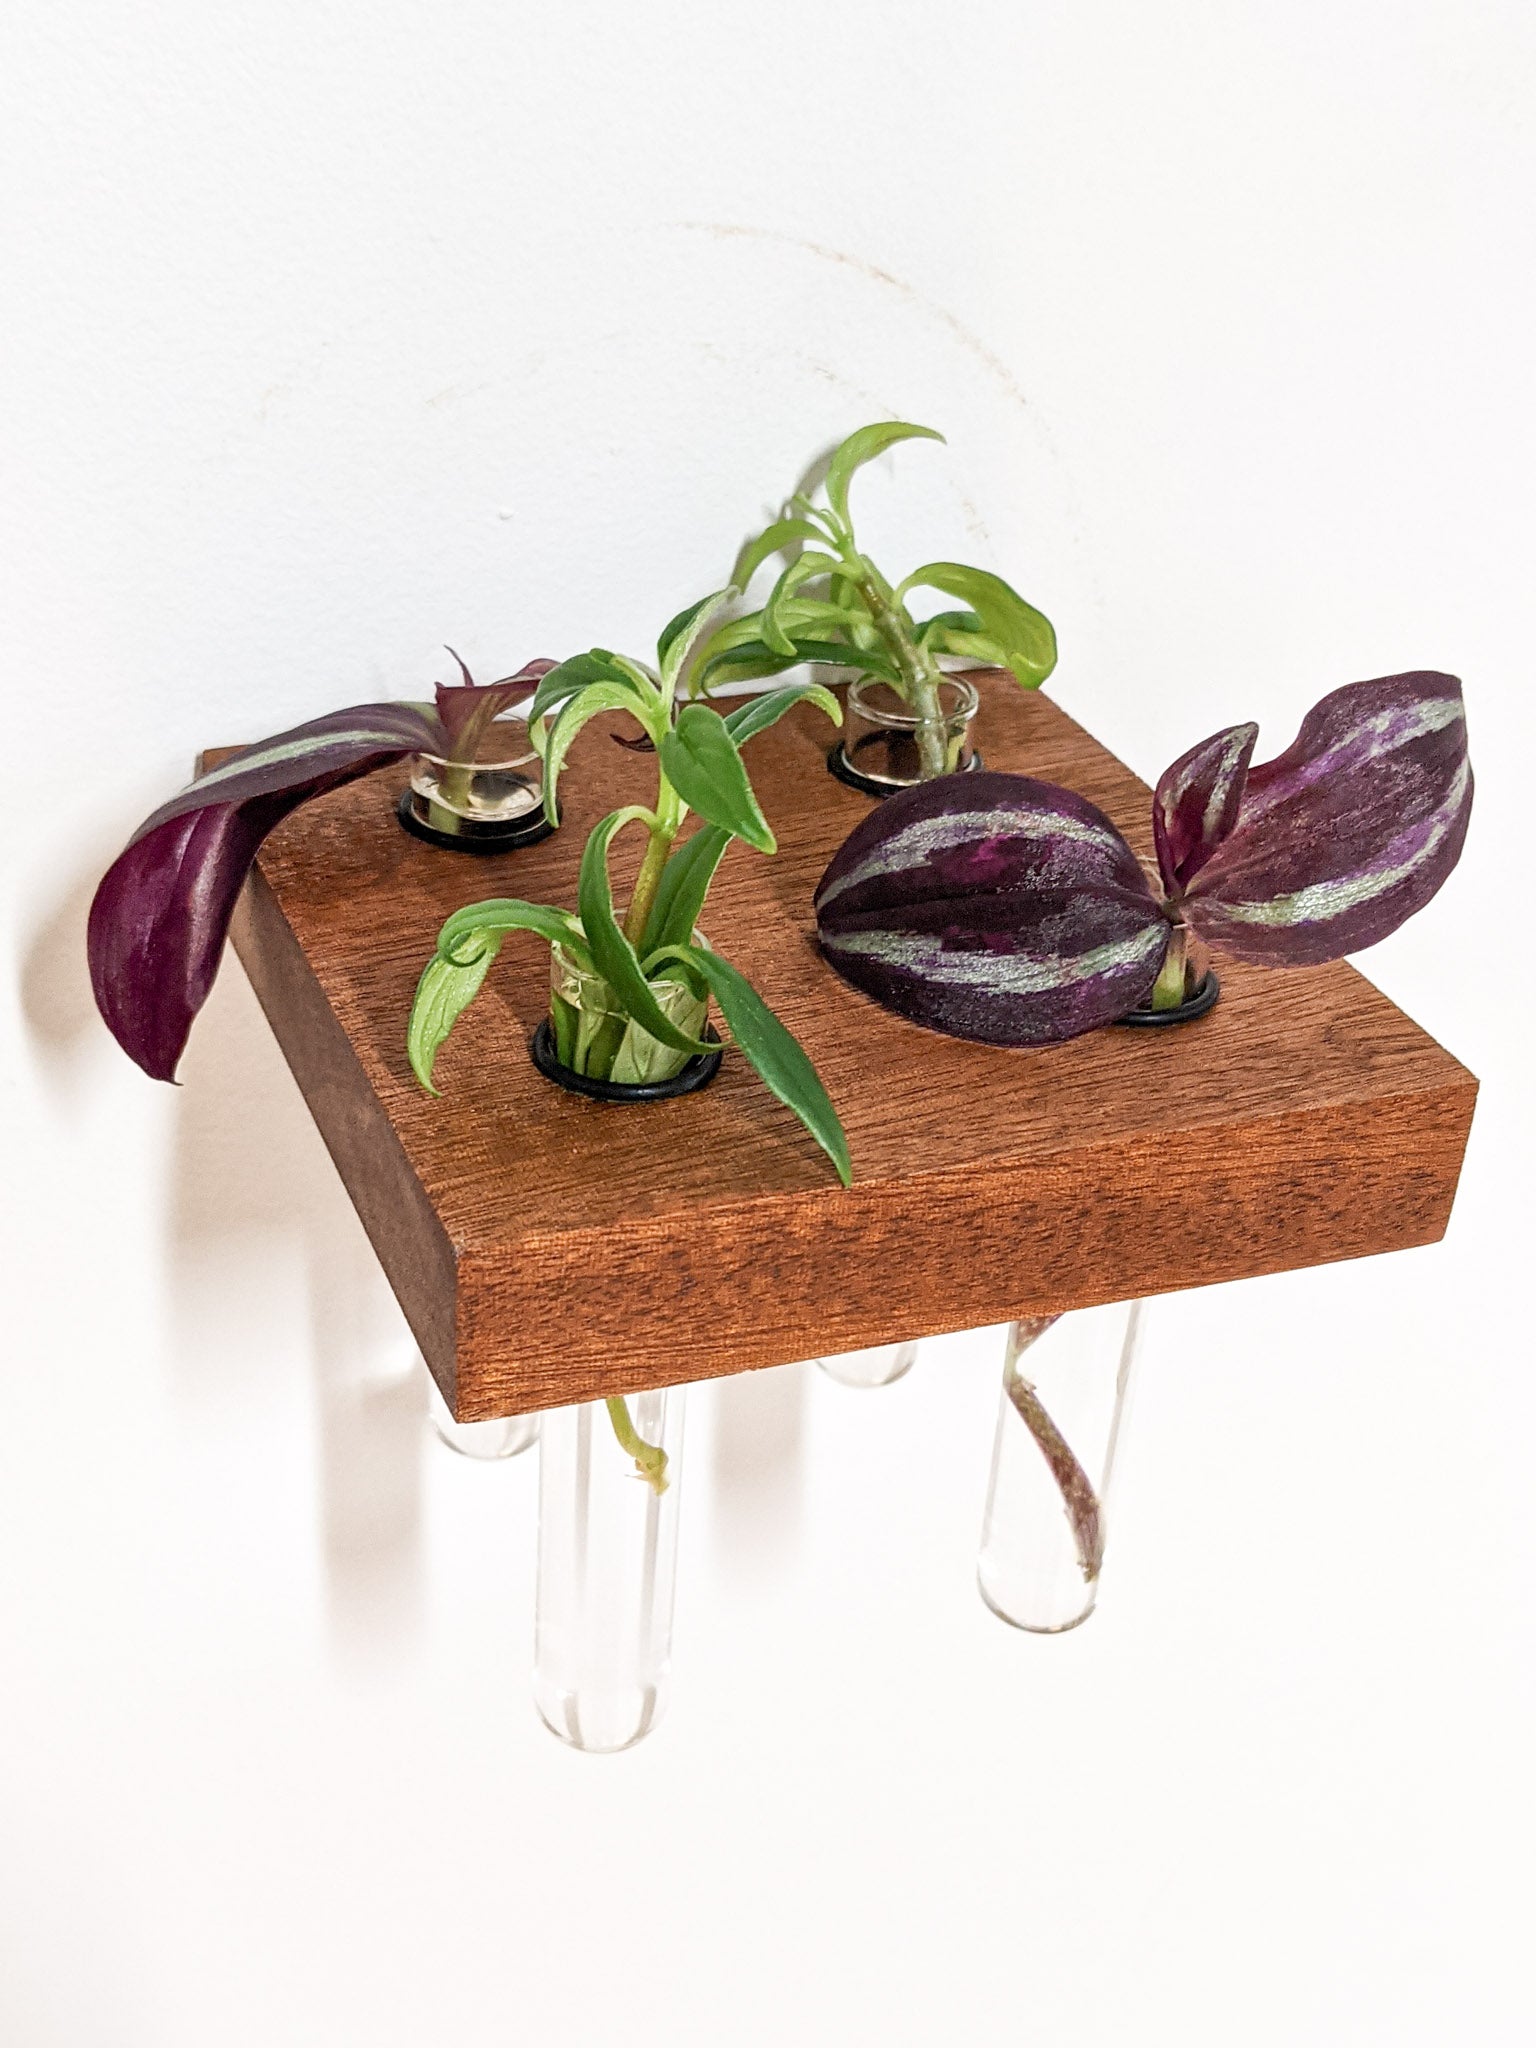 A top view of the square mahogany propagation floating shelf. Four cuttings of plants sit in four test tubes. The plants have purple and green leaves. The mahogany wood is dark brown and the edges are crisp. 